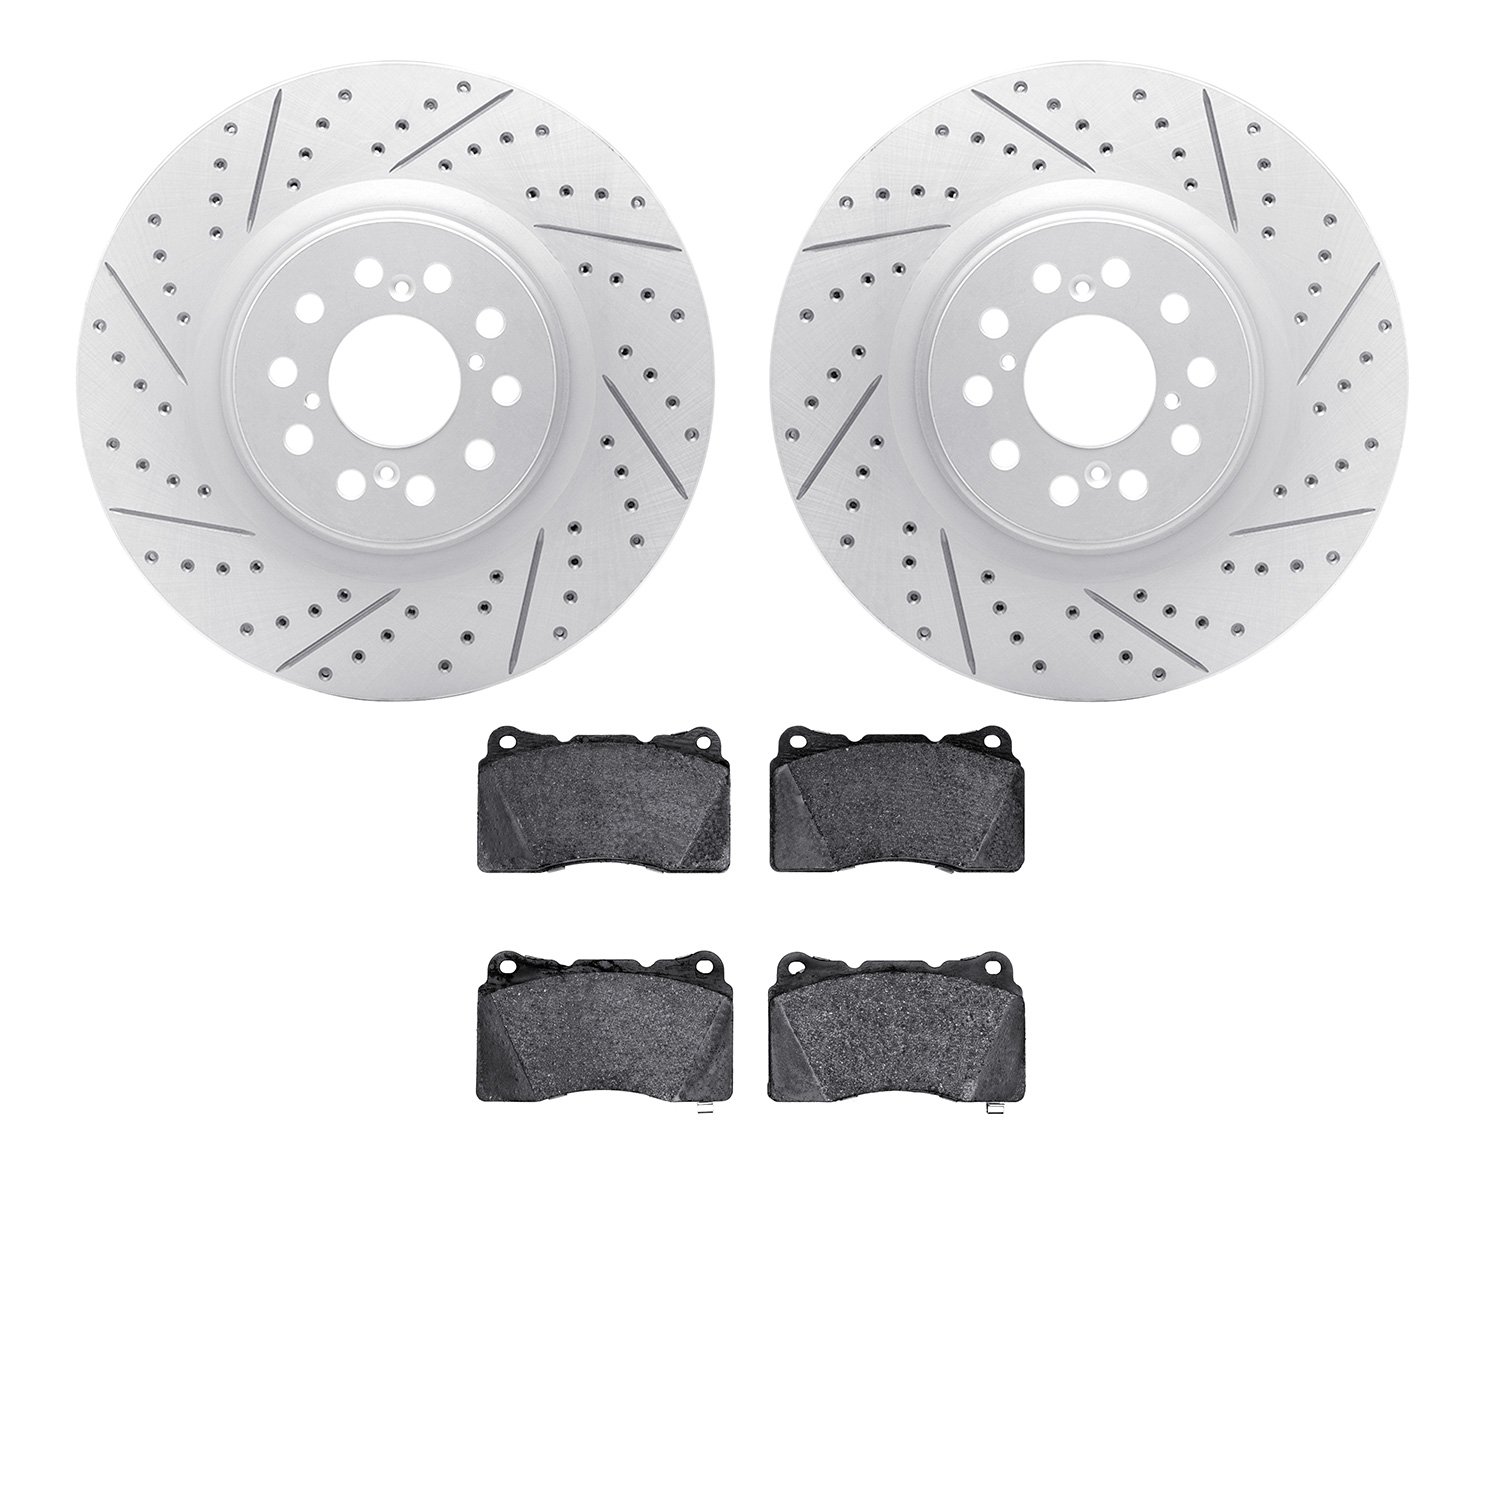 2502-59104 Geoperformance Drilled/Slotted Rotors w/5000 Advanced Brake Pads Kit, 2017-2019 Acura/Honda, Position: Front